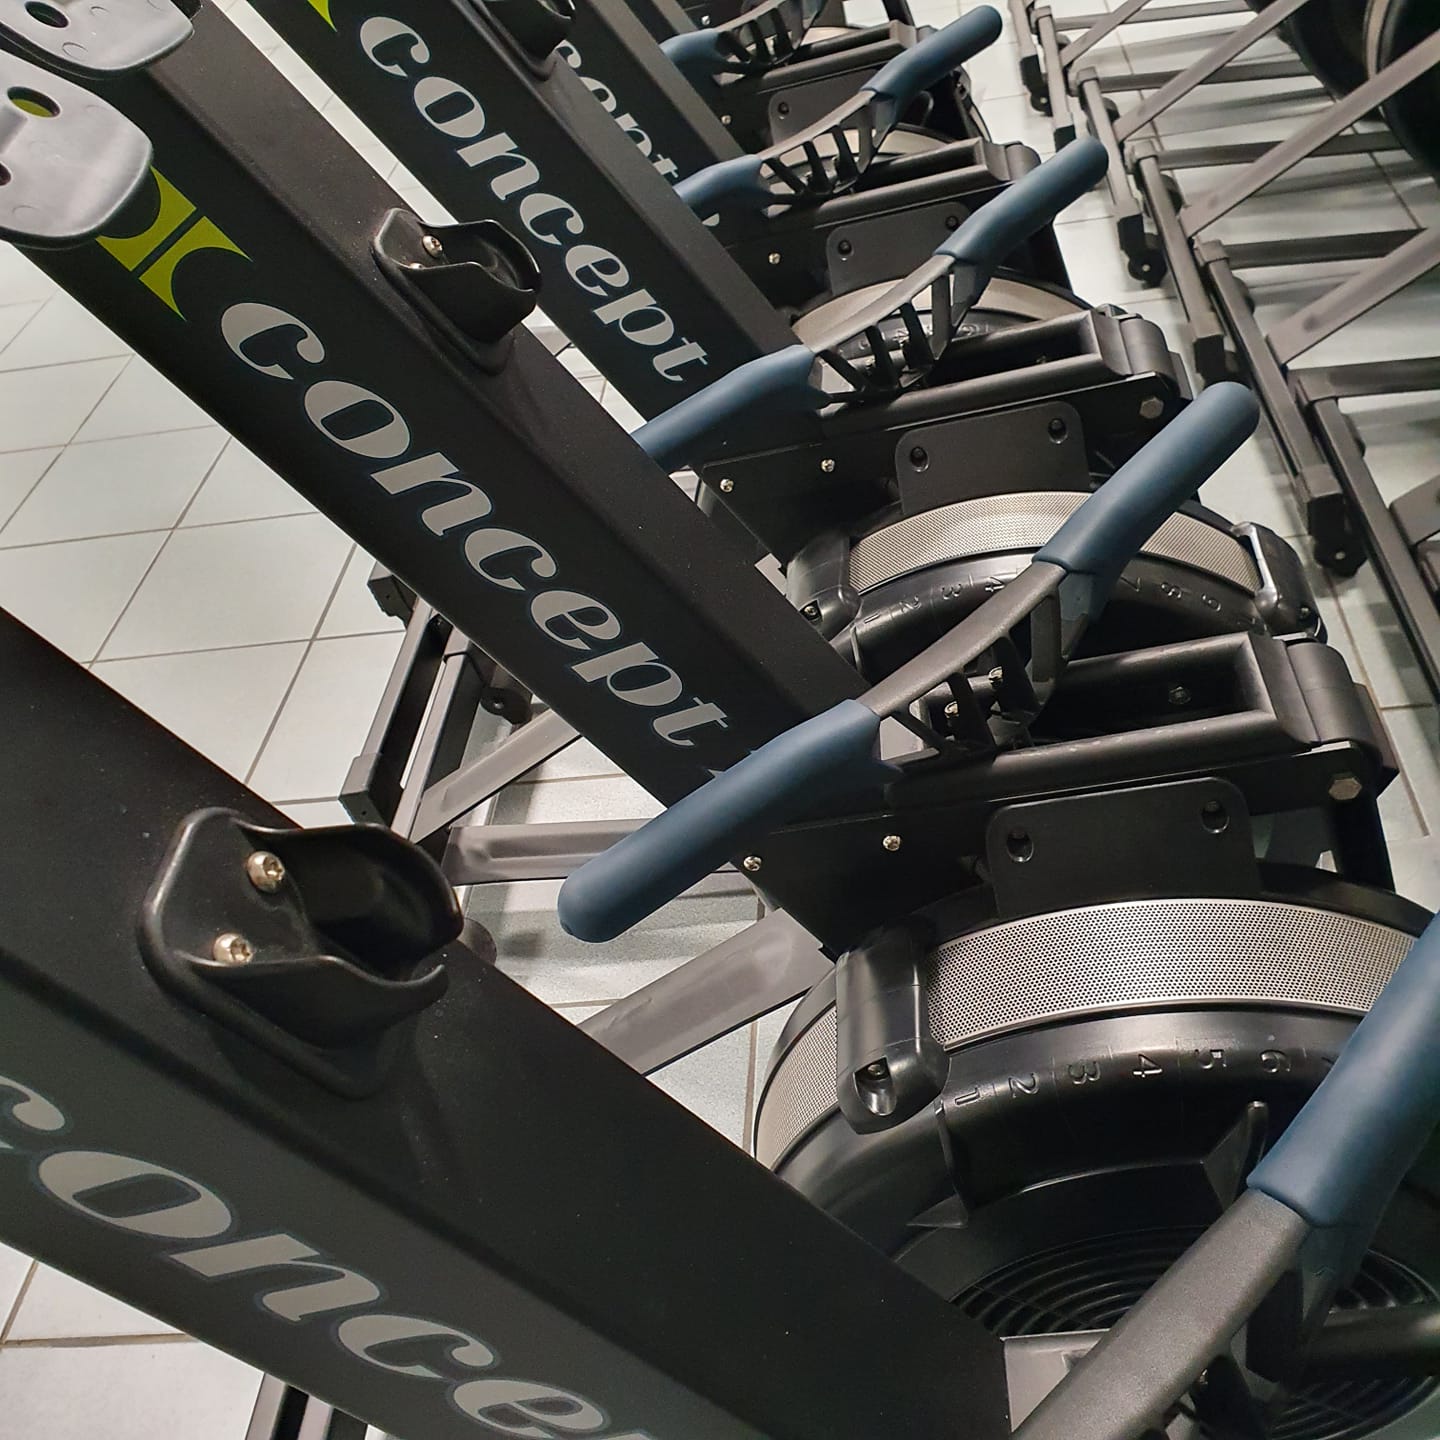 Indoor Rowing in palestra a Trento | Prosport a.s.d. Trento | canottaggio indoor